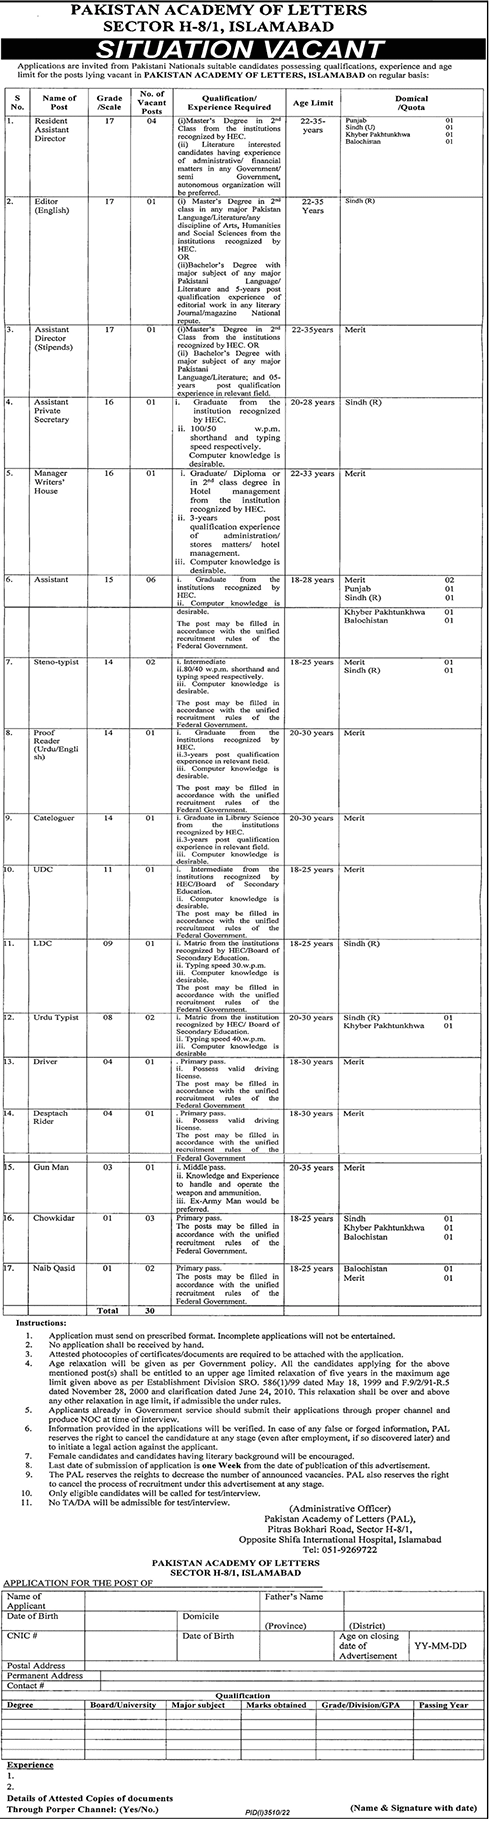 Latest Govt Jobs in Pakistan Academy of Letters